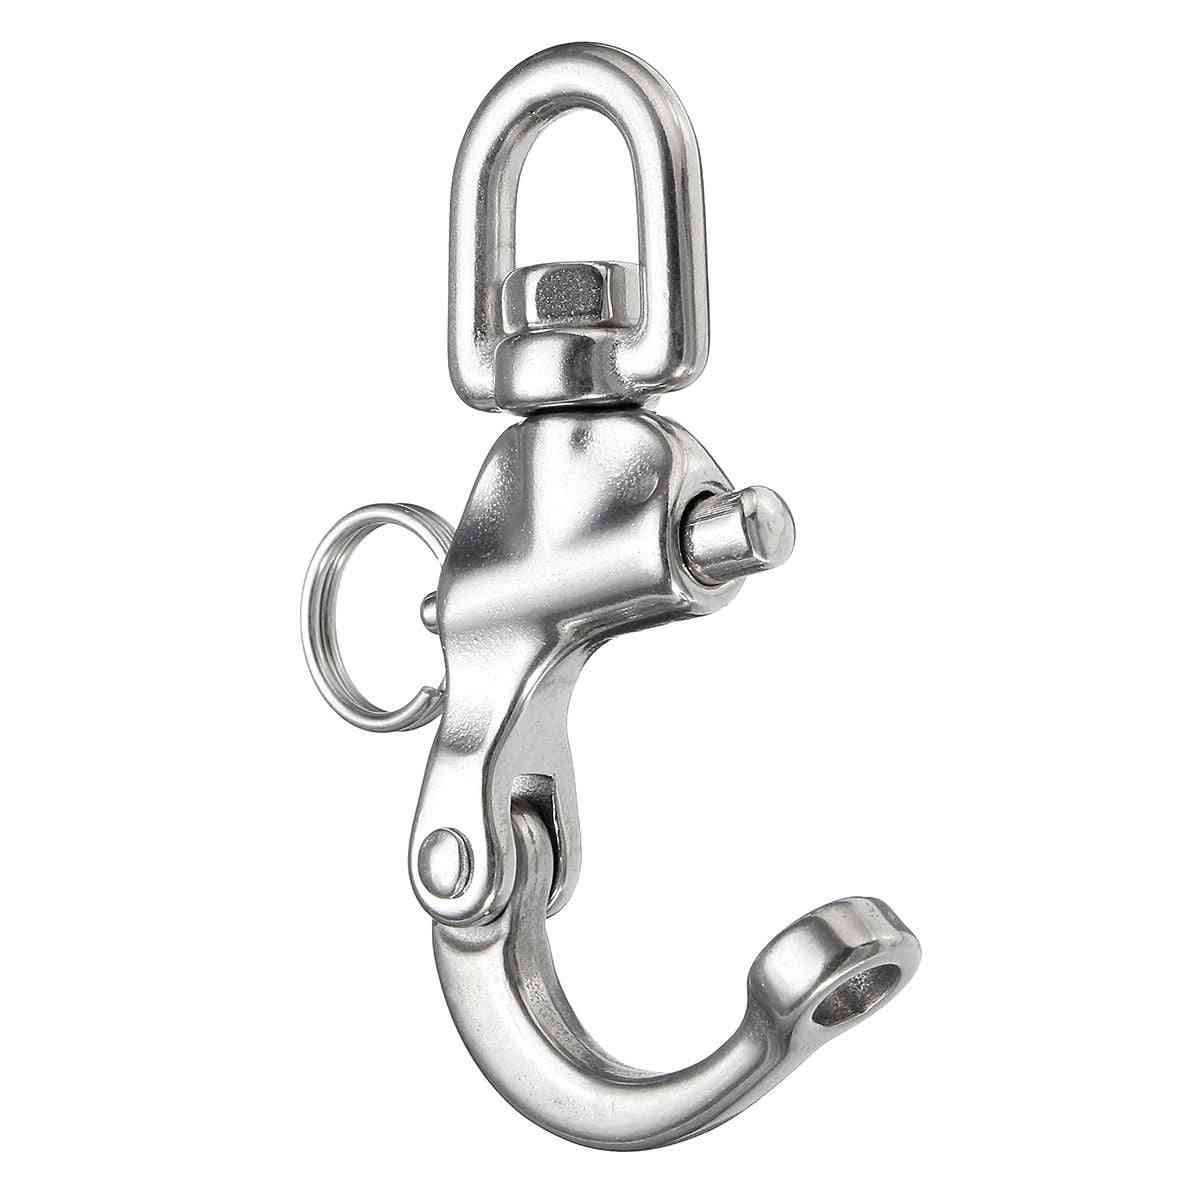 Stainless Steel Swivel Shackle- Quick Release Boat Anchor Chain